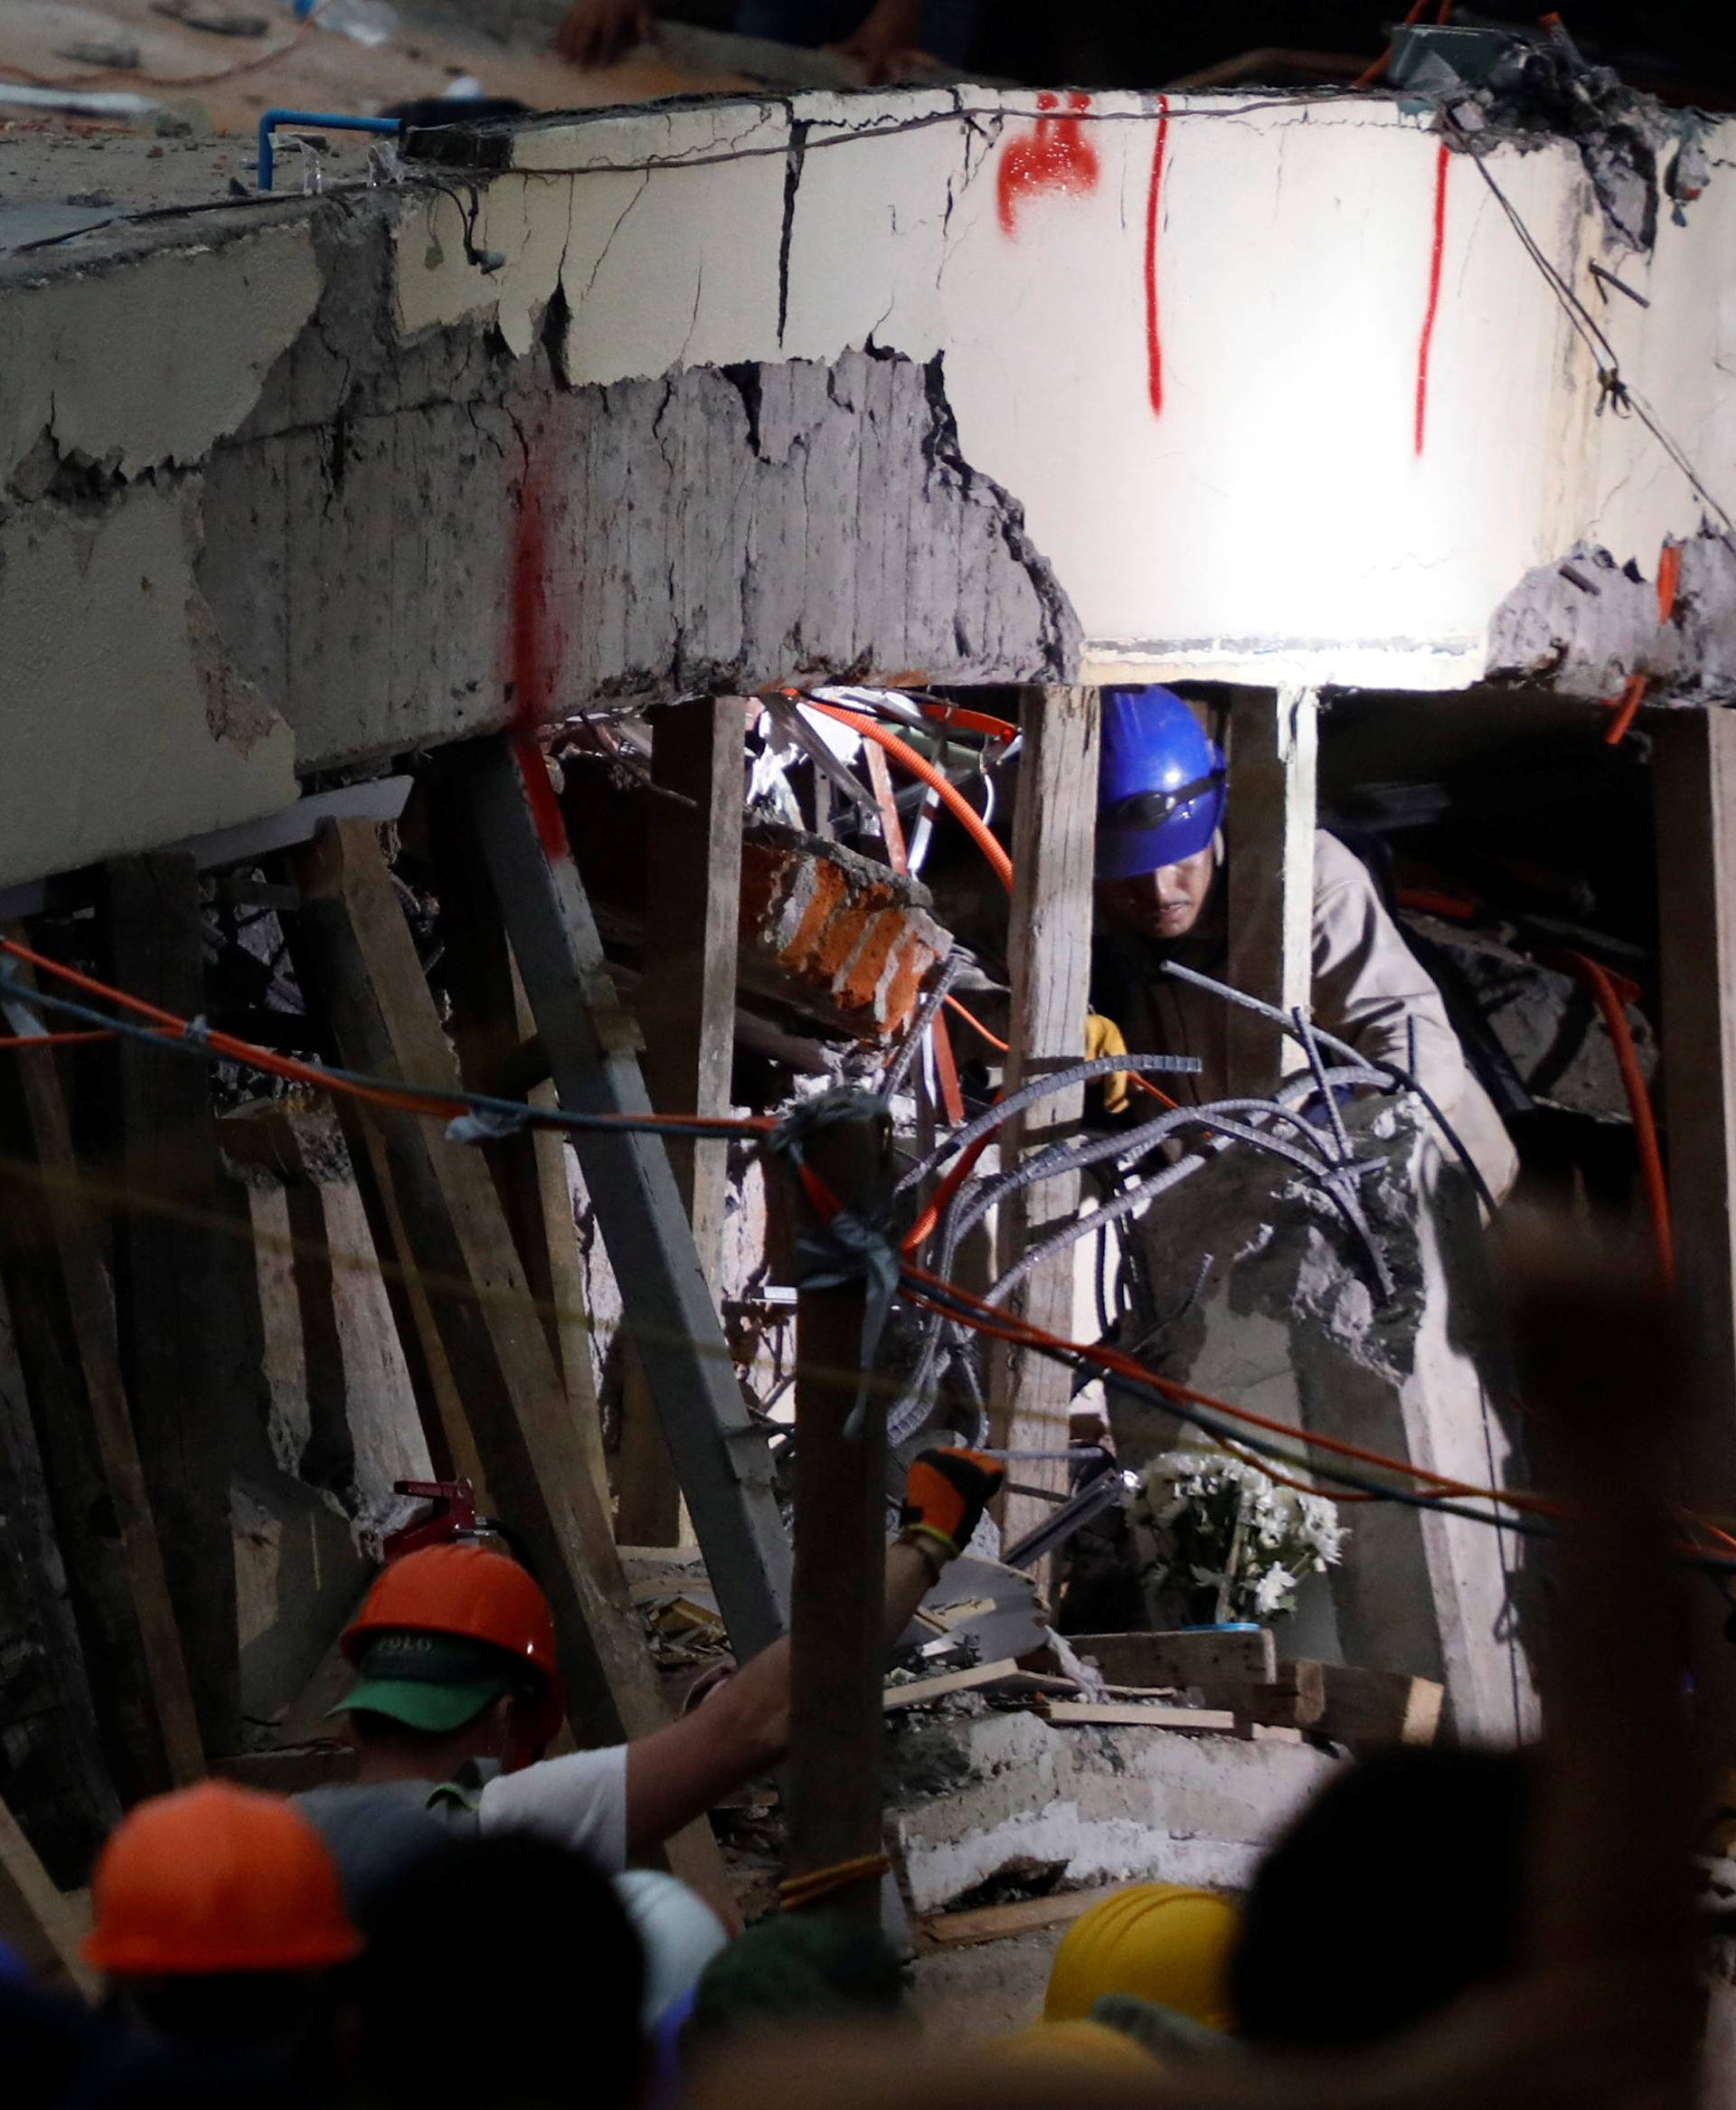 Rescue workers search through the rubble for students at Enrique Rebsamen school after an earthquake in Mexico City